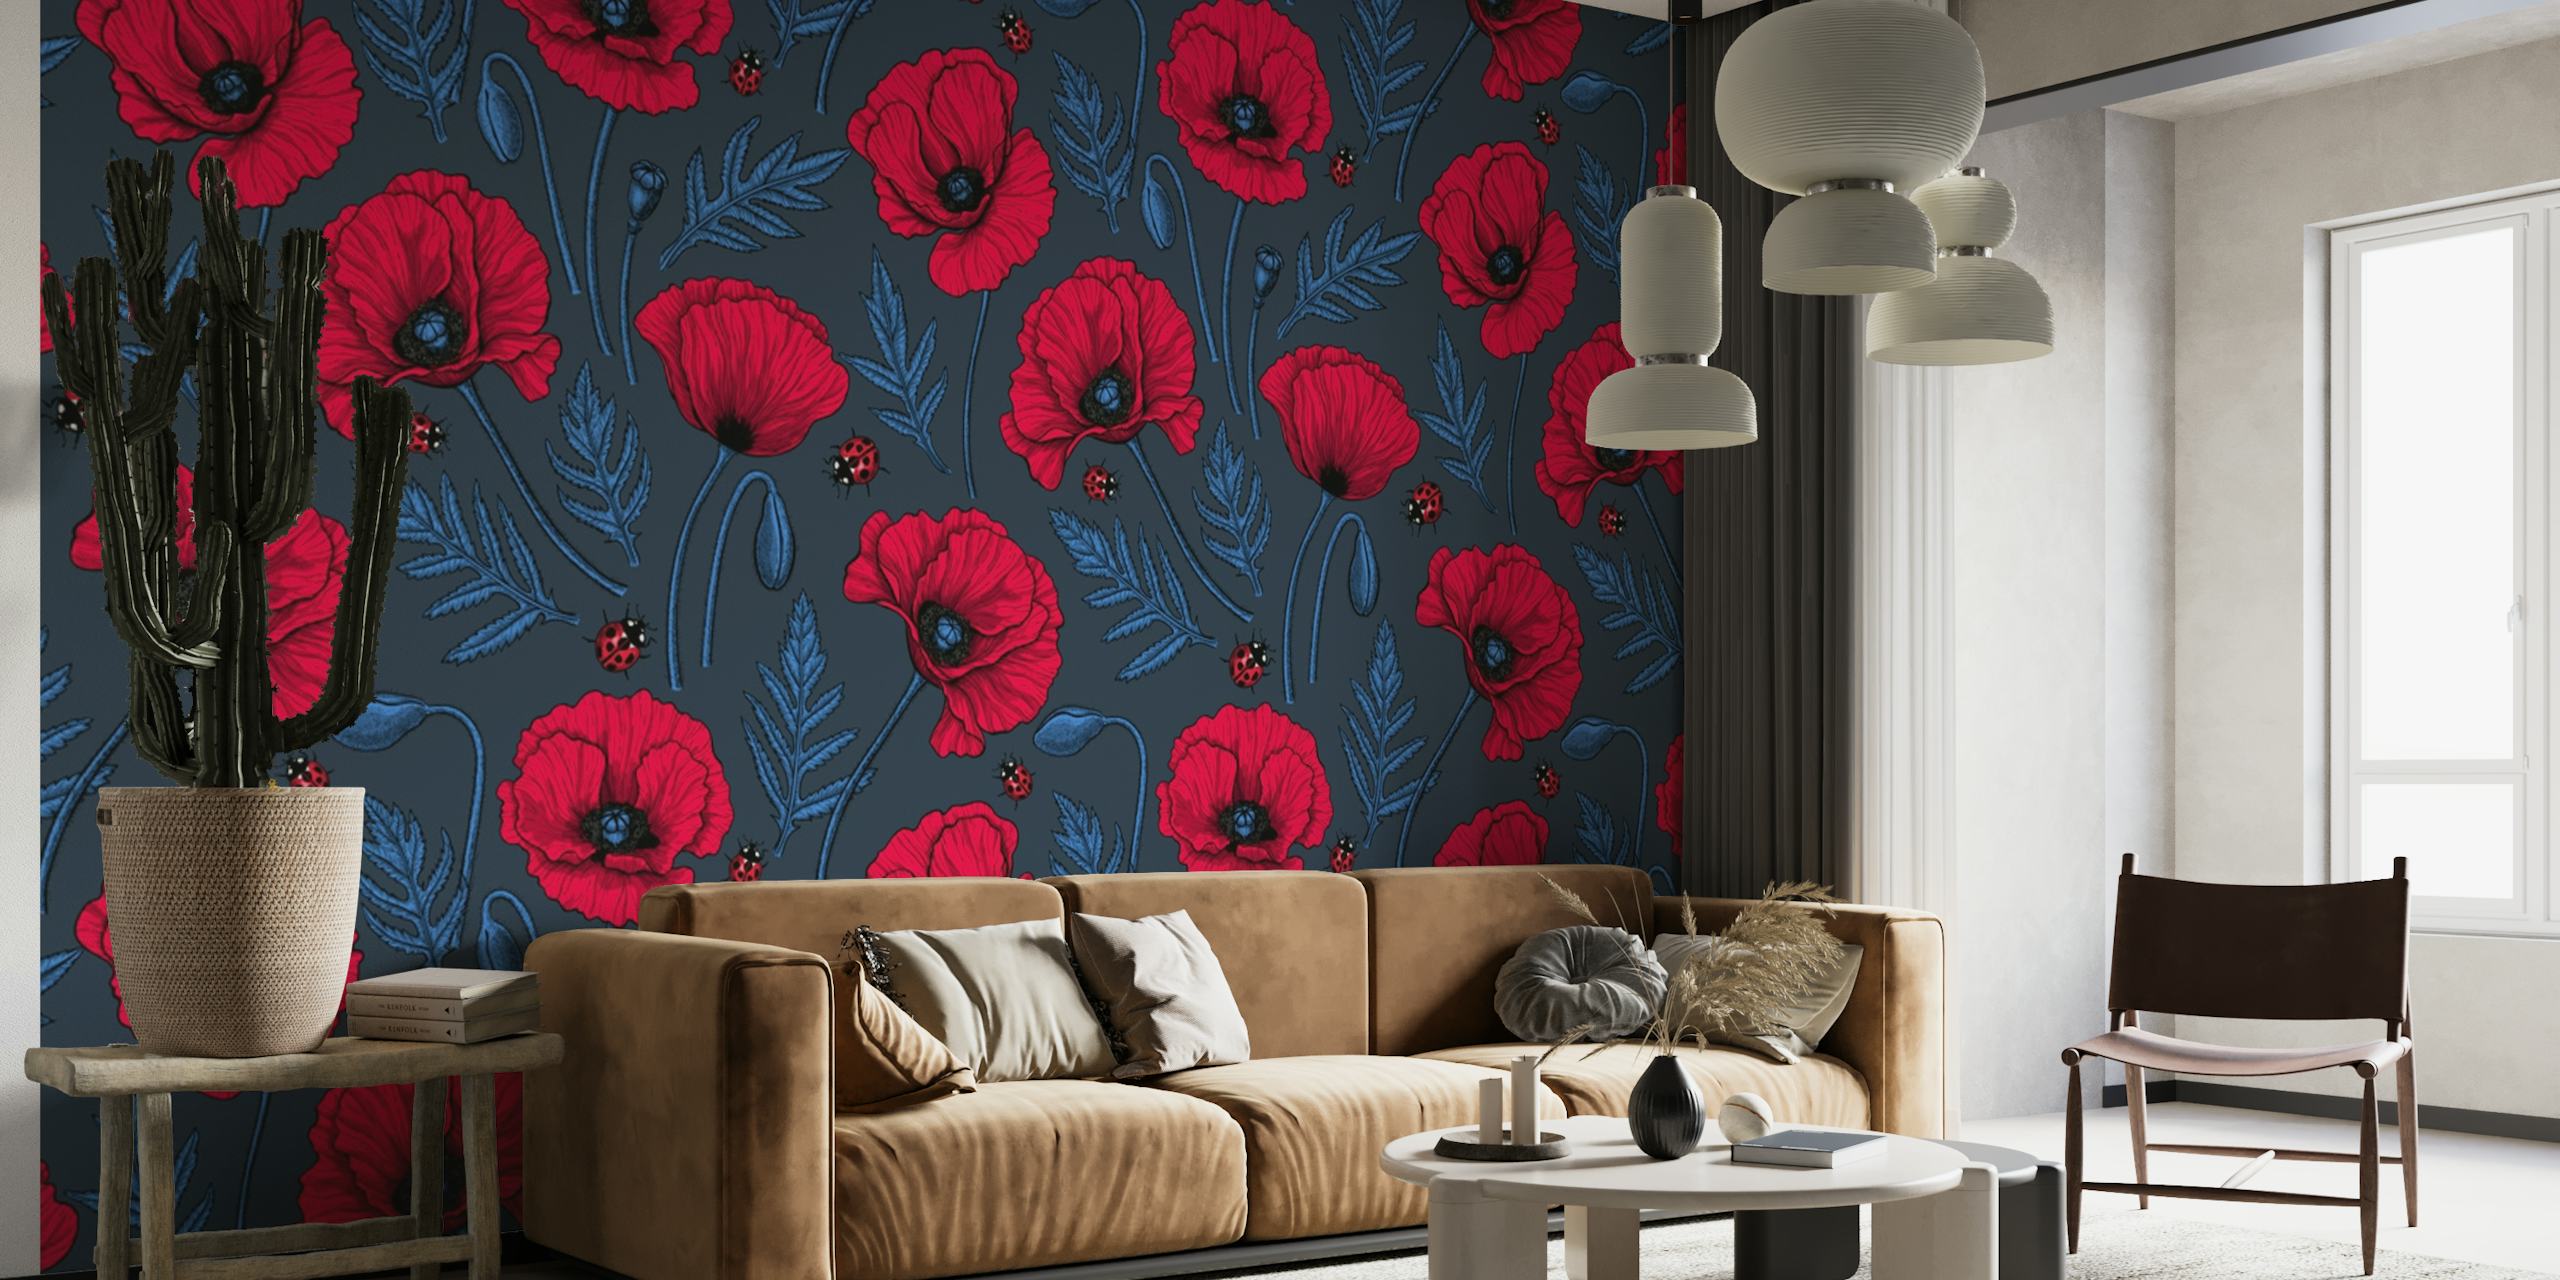 A vibrant wall mural featuring red poppies with ladybugs on a blue background.